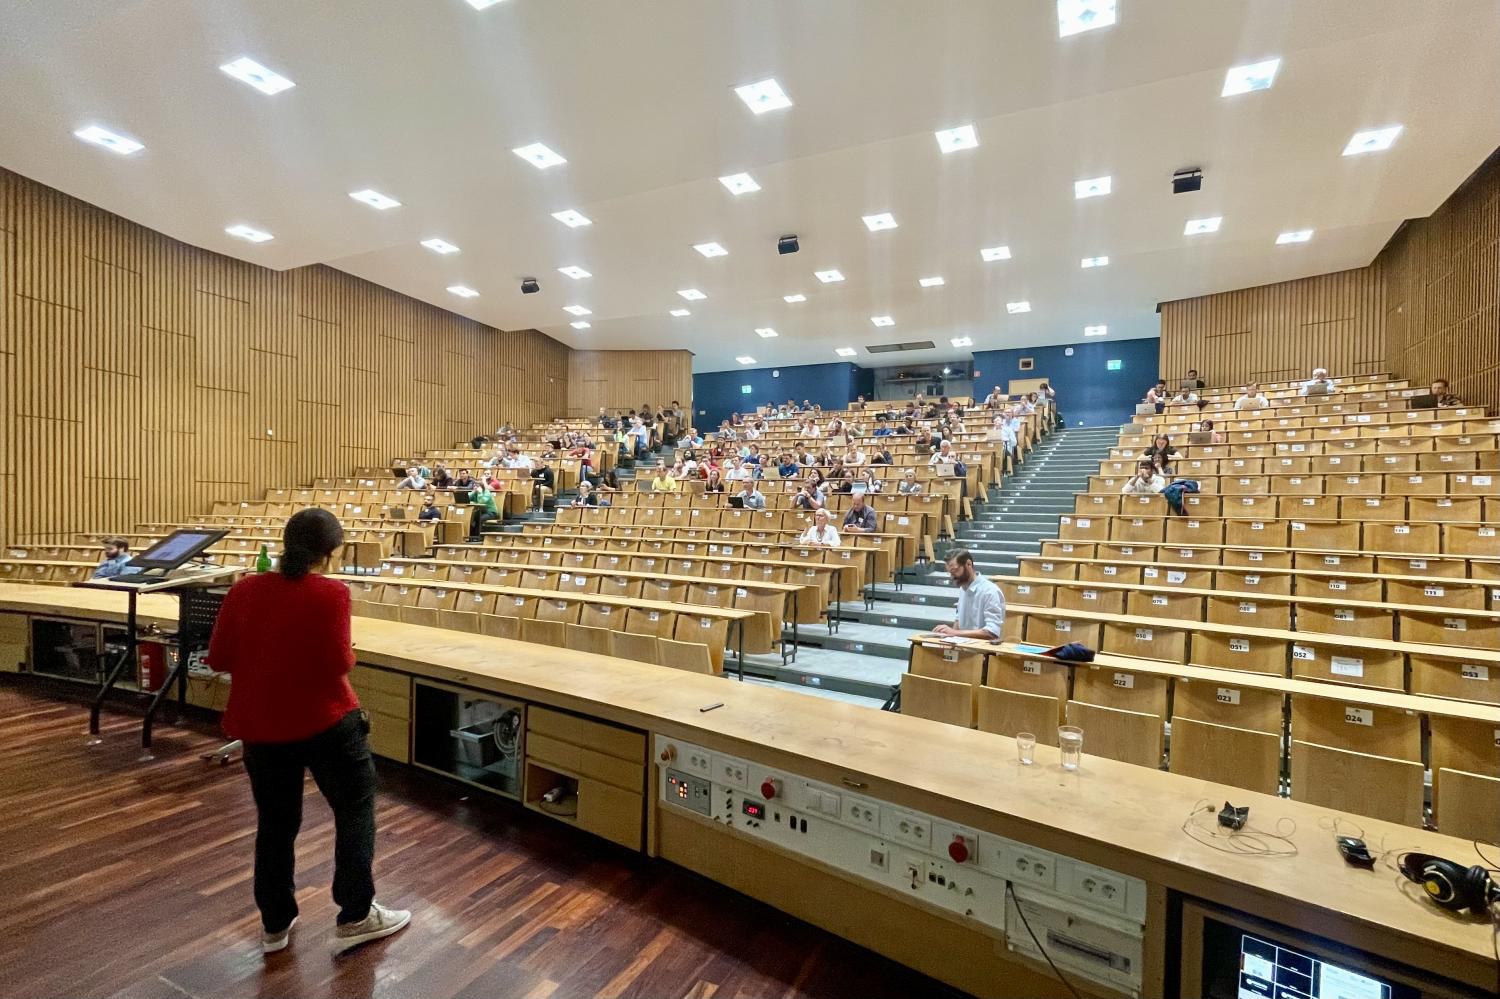 The Wolfgang Paul Lecture Hall